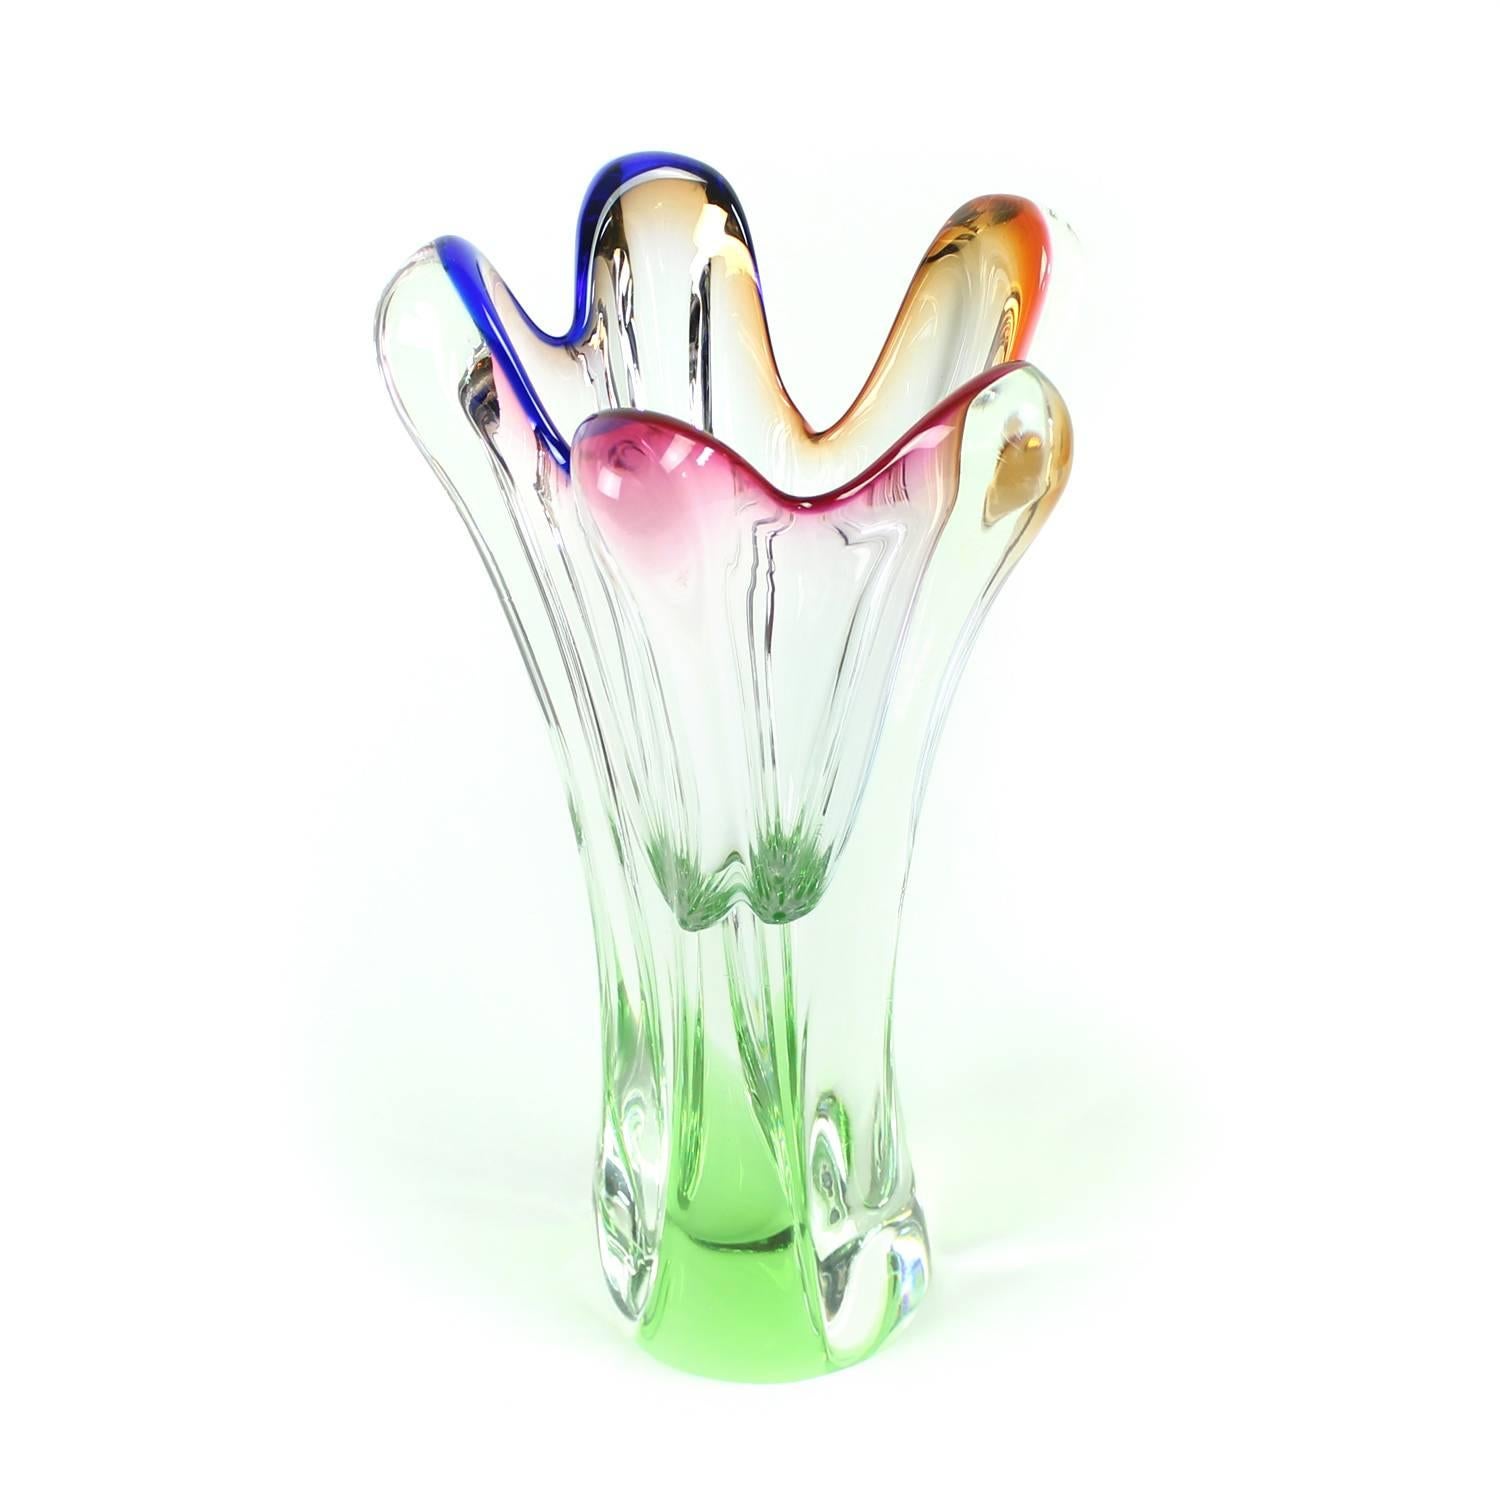 Beautiful and heavy art glass vase designed by Josef Hurka for Glass Factory Chribska. Rare item so typical of the Bohemian glass making tradition. Excellent design combining modern and bright colors into a strong piece. Very elegant design. Very